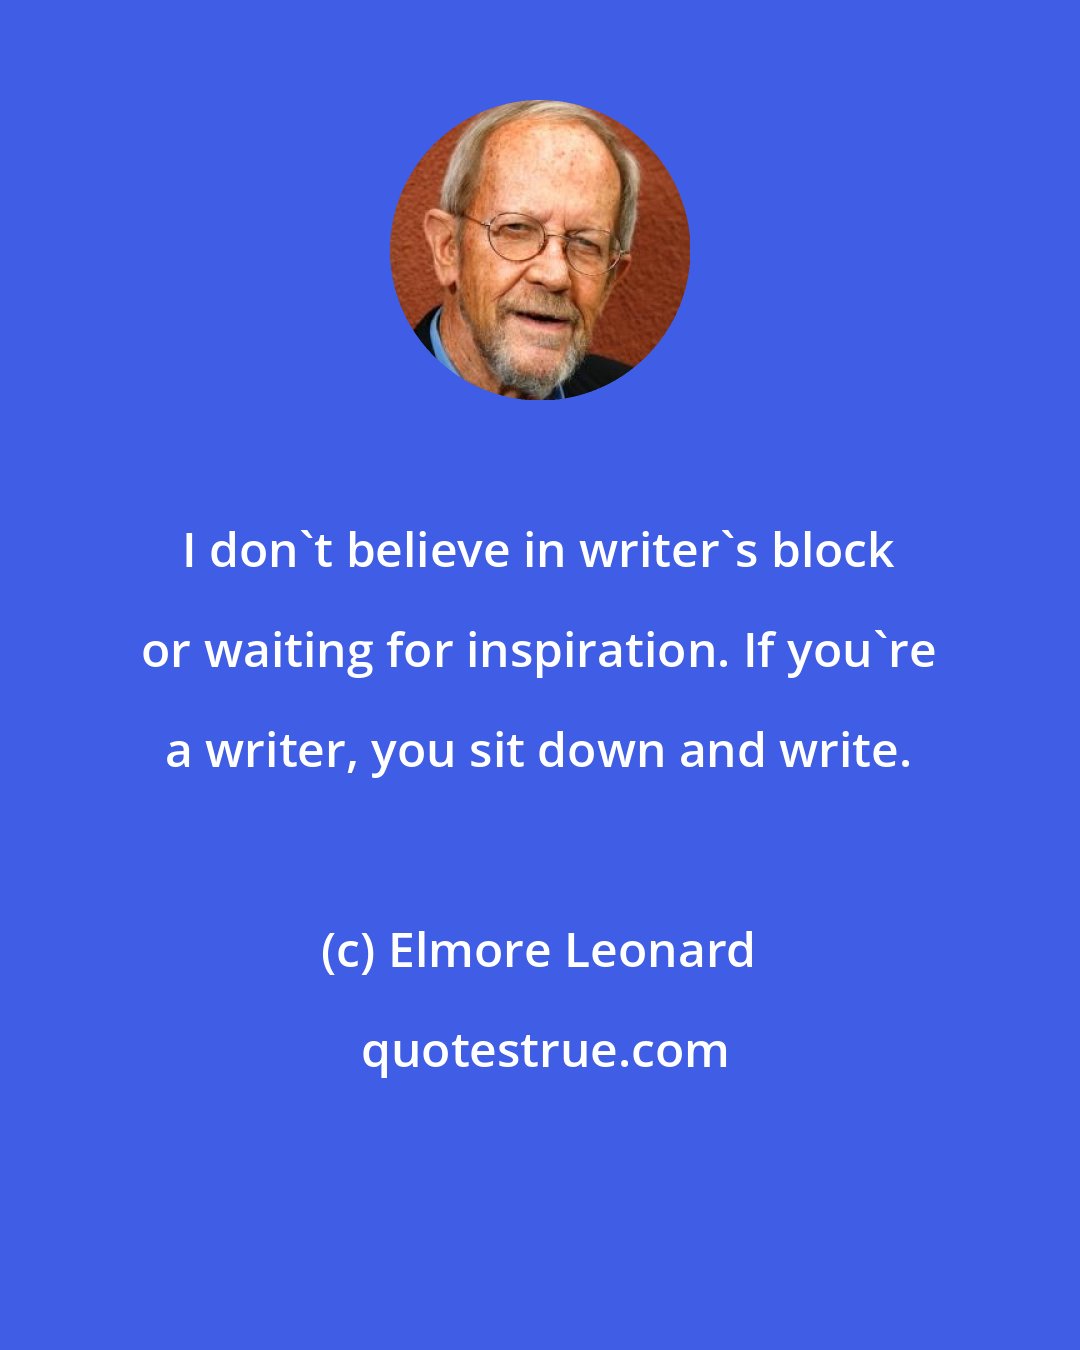 Elmore Leonard: I don't believe in writer's block or waiting for inspiration. If you're a writer, you sit down and write.